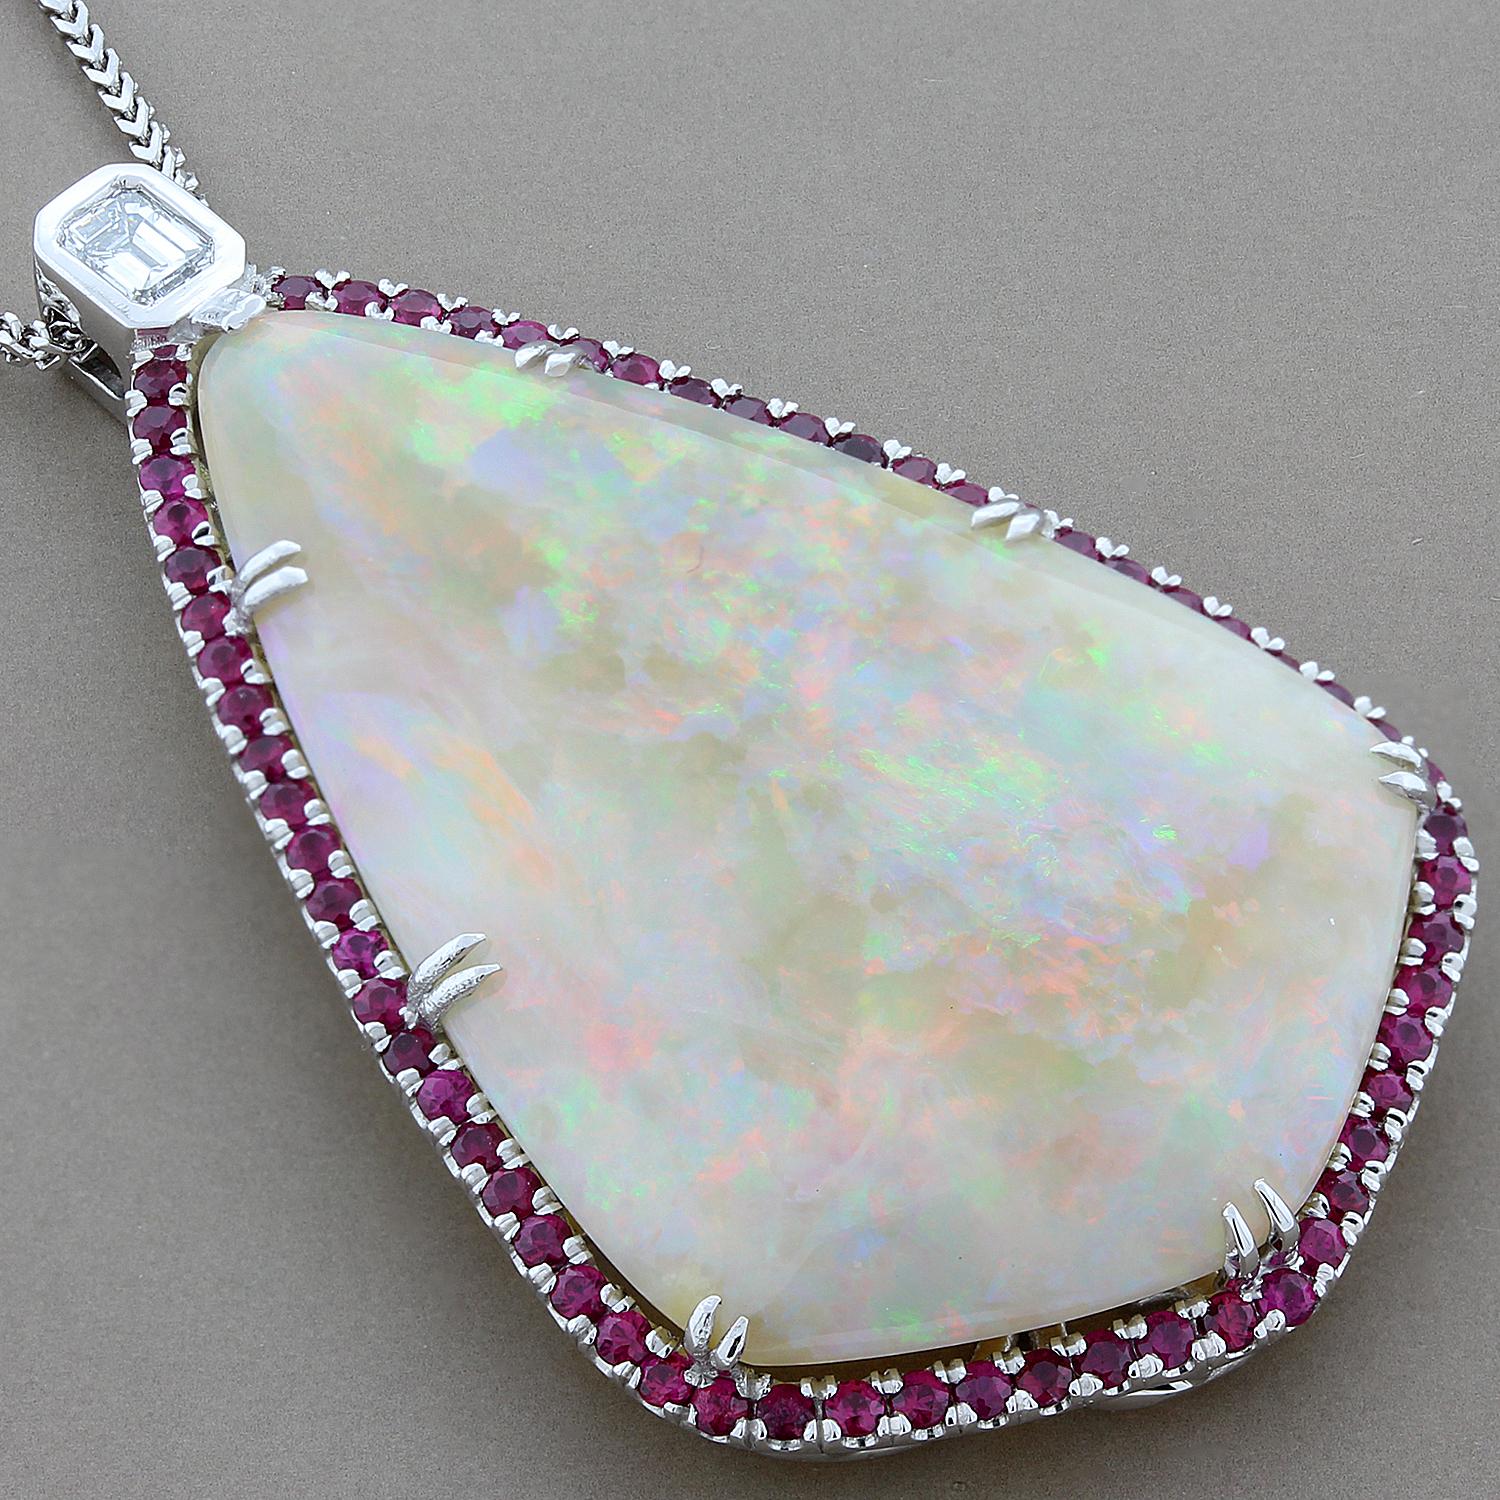 A special 34.84 carat kite shape double cabochon natural opal is bordered by 2.18 crats of round rubies. Revered as a symbol of hope, fidelity and purity, opal was dubbed the Queen of Gems by the ancient Romans because it encompasses the colors of